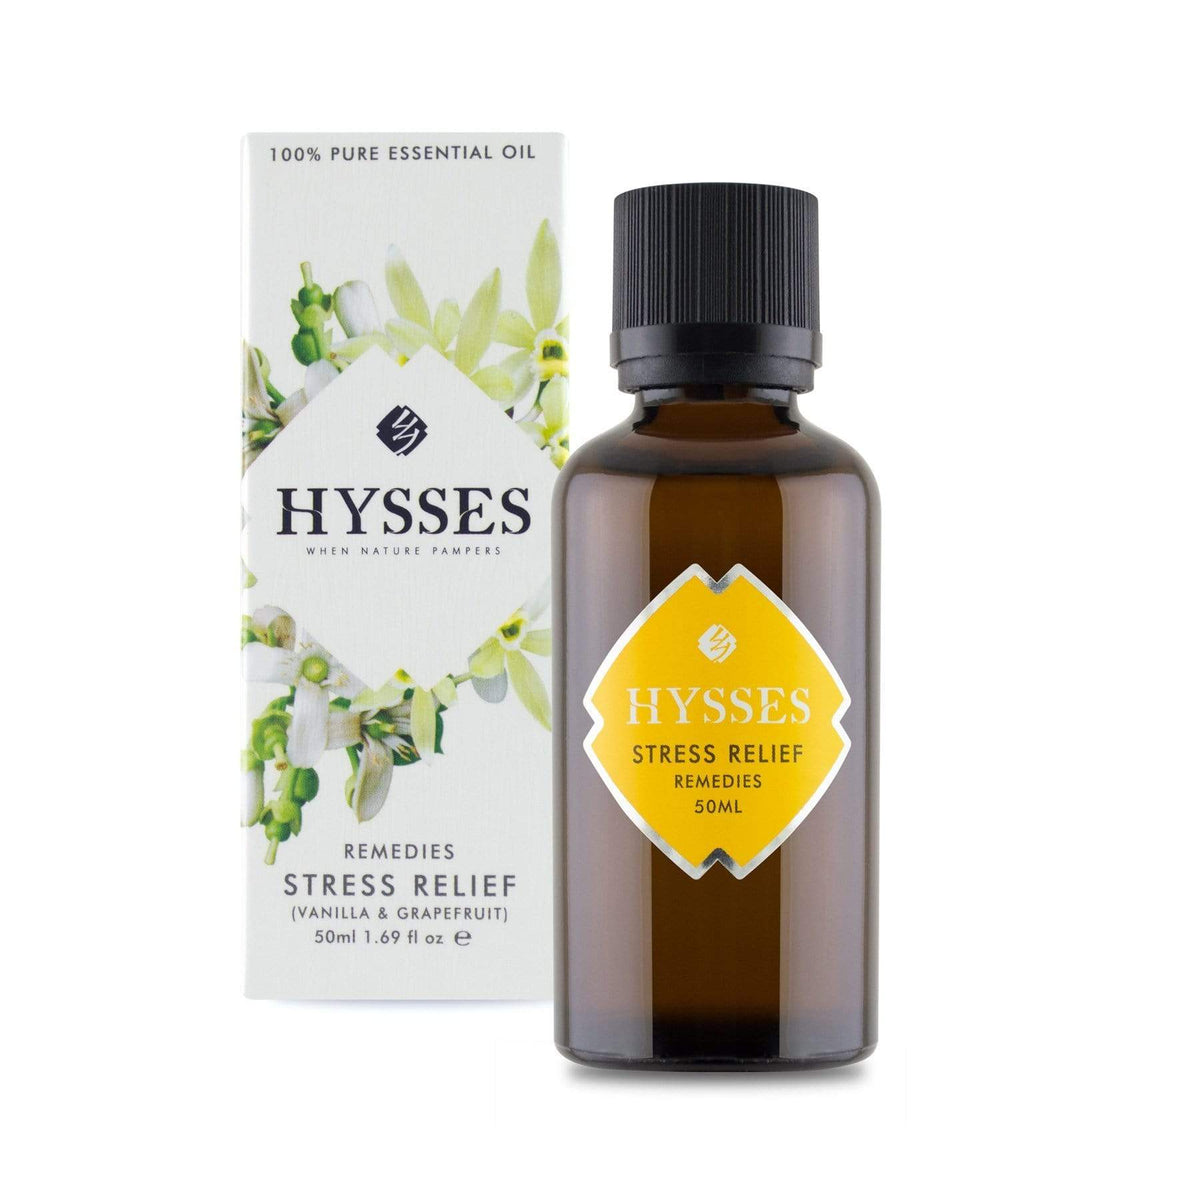 Hysses Essential Oil Remedies, Stress Relief